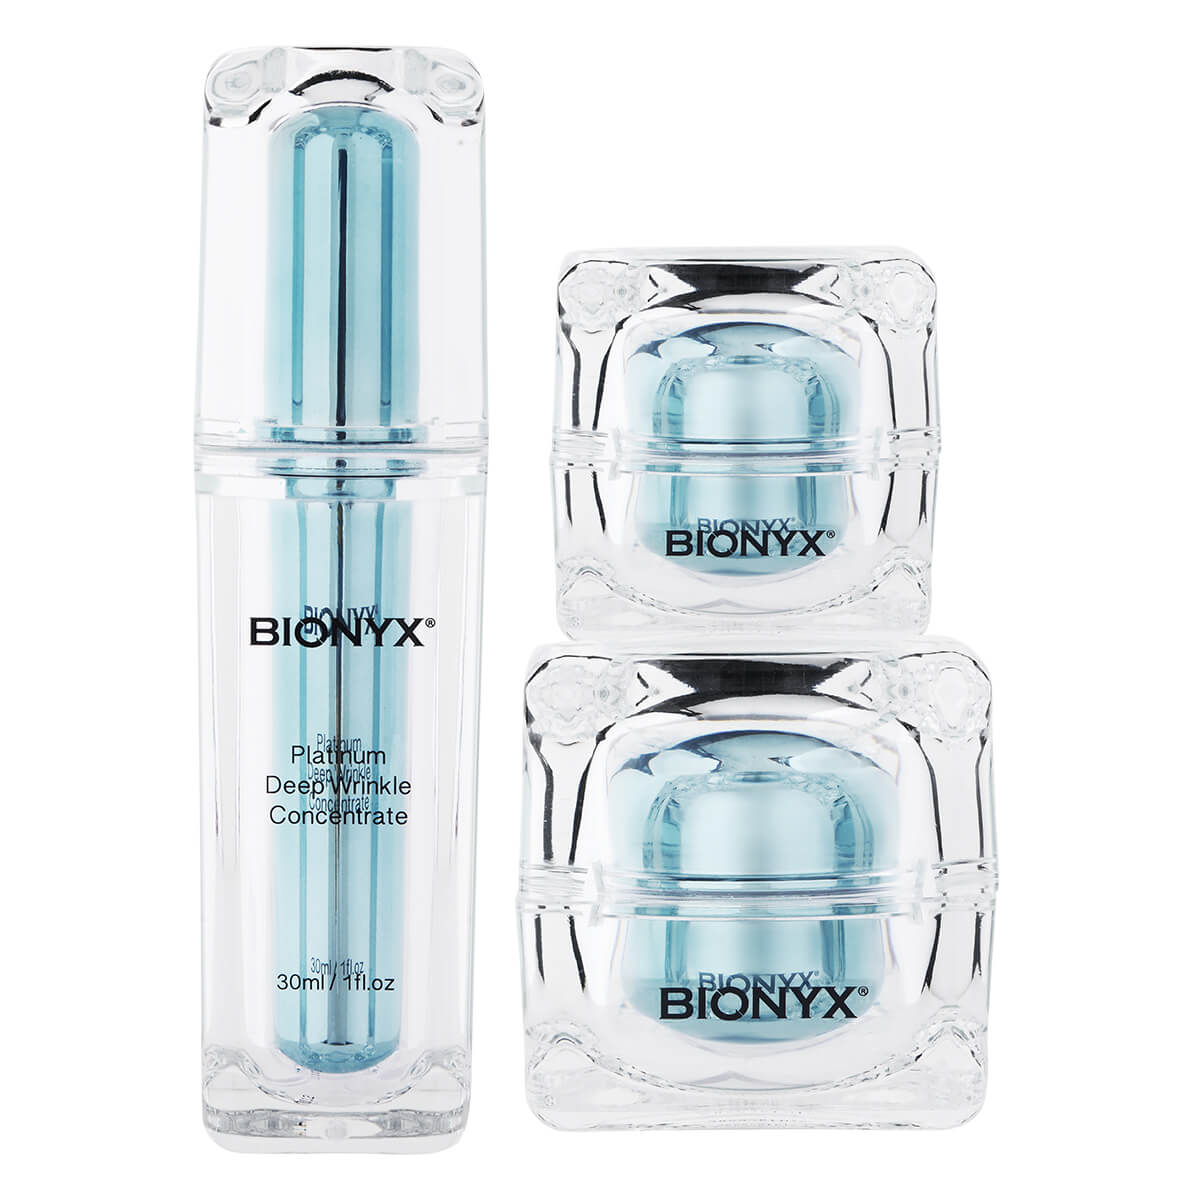 Bionyx Reviews - 6 Skincare Sets That'll Transform the Look of 